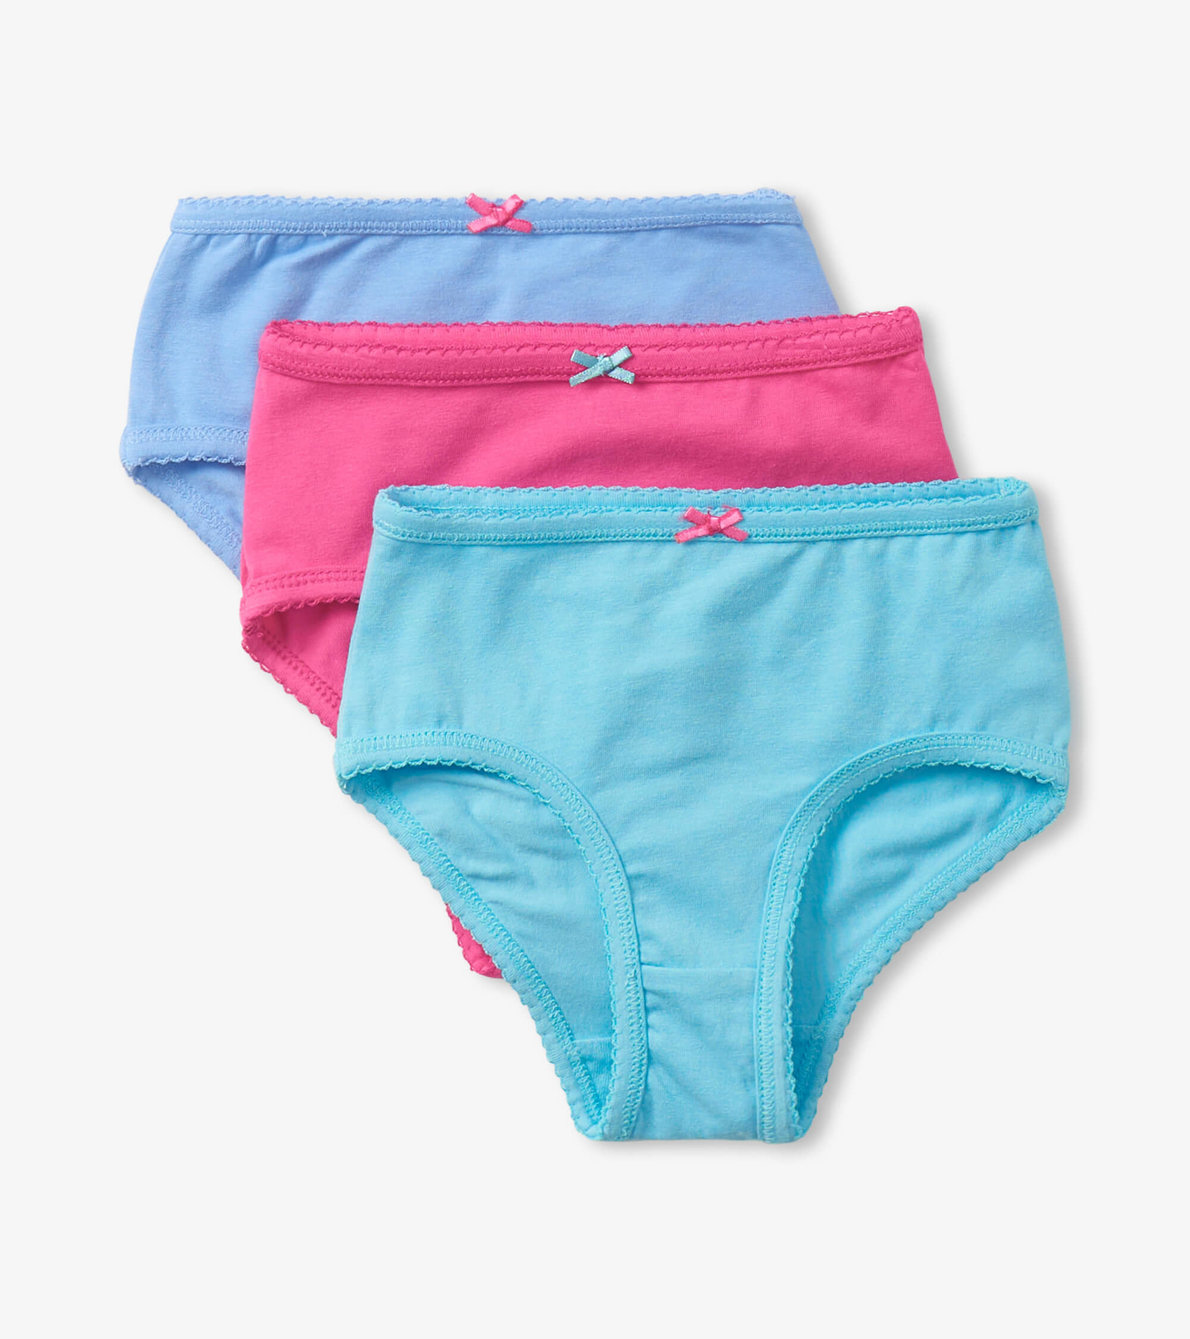 View larger image of Classic Solids Girls Brief Underwear 3 Pack